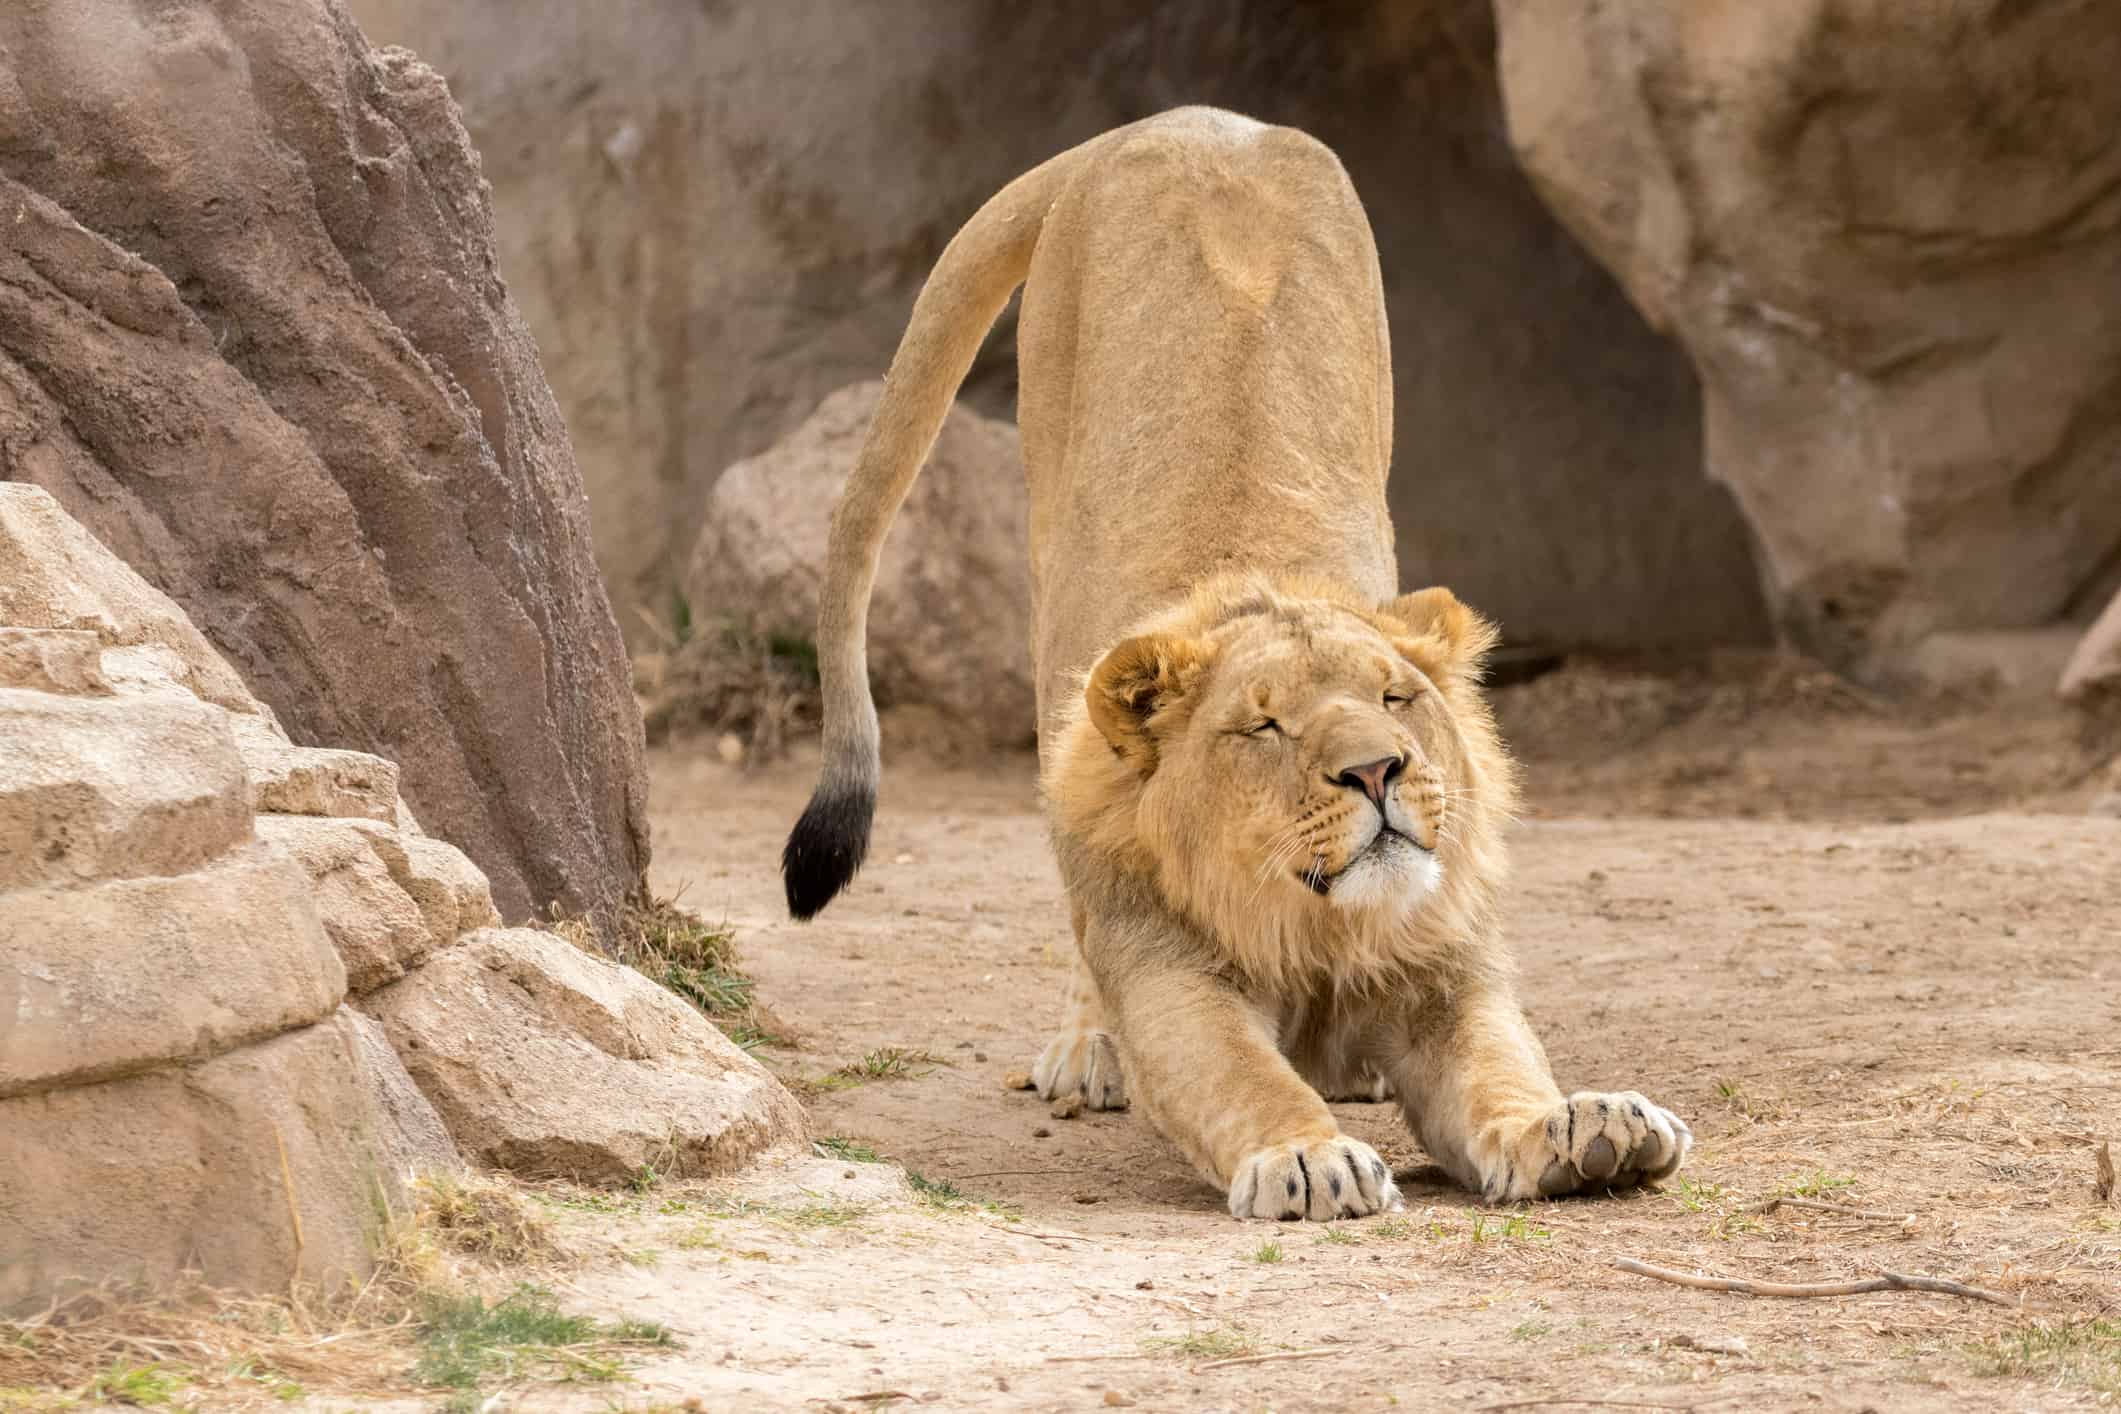 Lion stretches after waking up from a nap